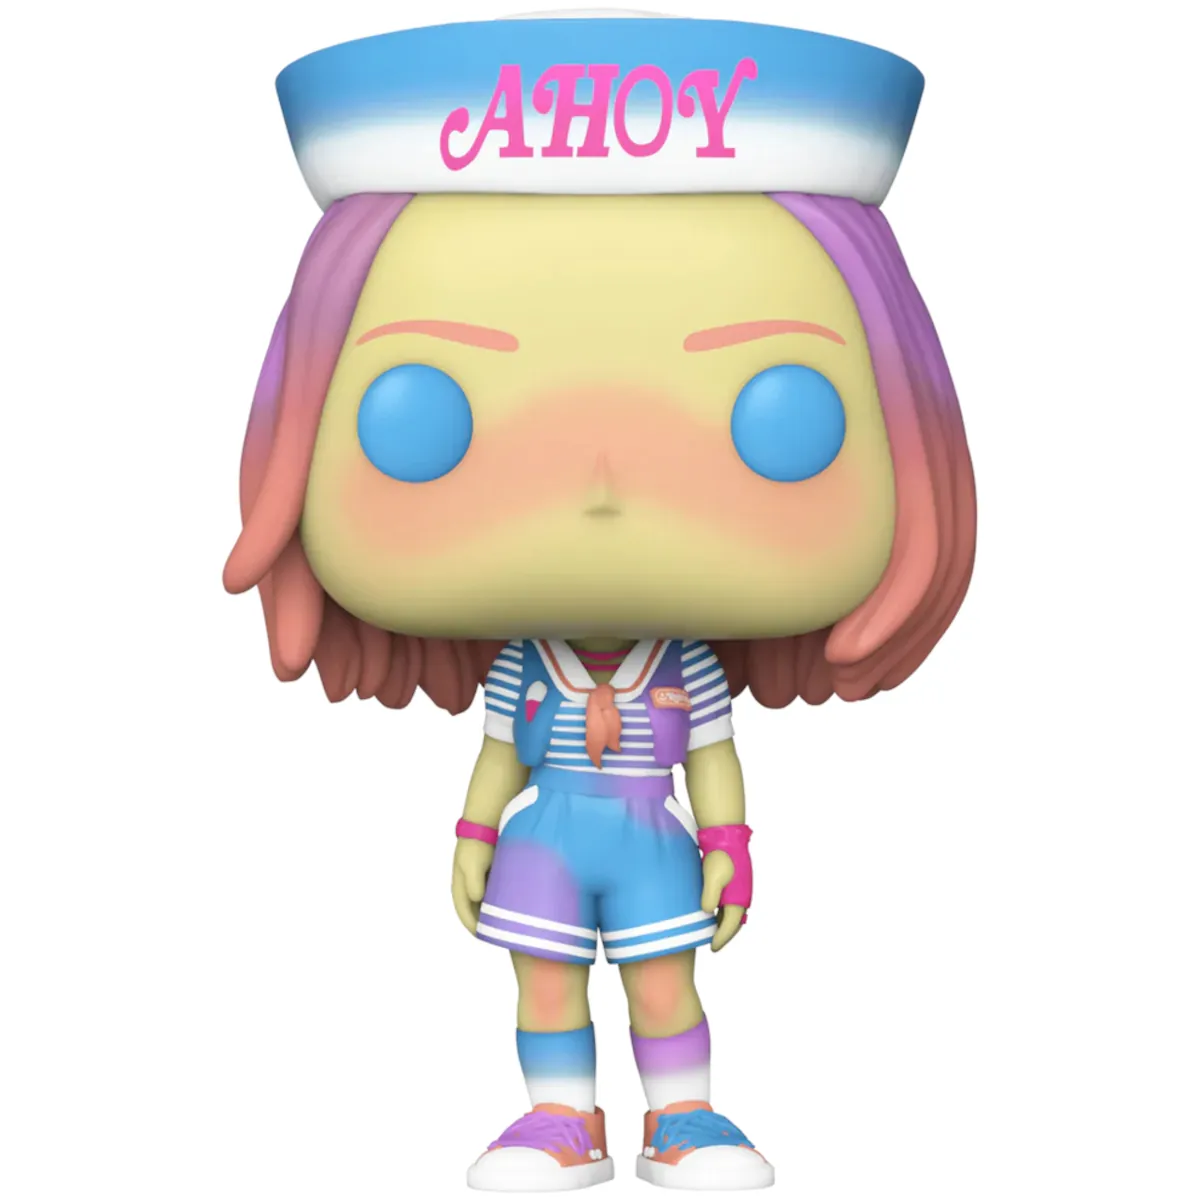 79997 Funko Pop! Television - Stranger Things - Robin (Scoops Ahoy) Collectable Vinyl Figure